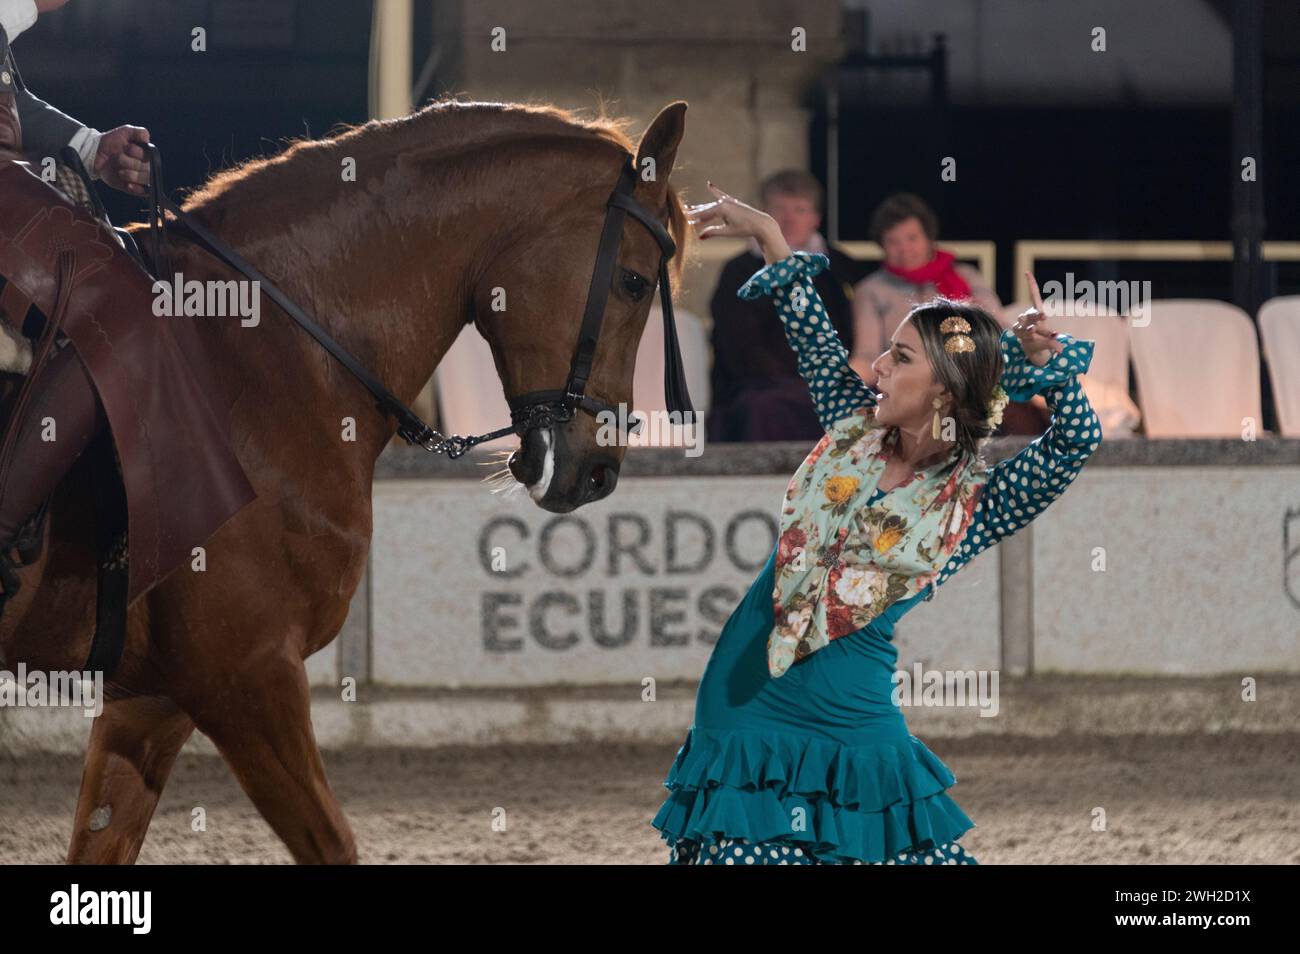 A flamenco dancer comes face-to-face with an Andalusian horse during a dressage public performance,  'Passion and Spirit of the Andalusian Horse' Eque Stock Photo